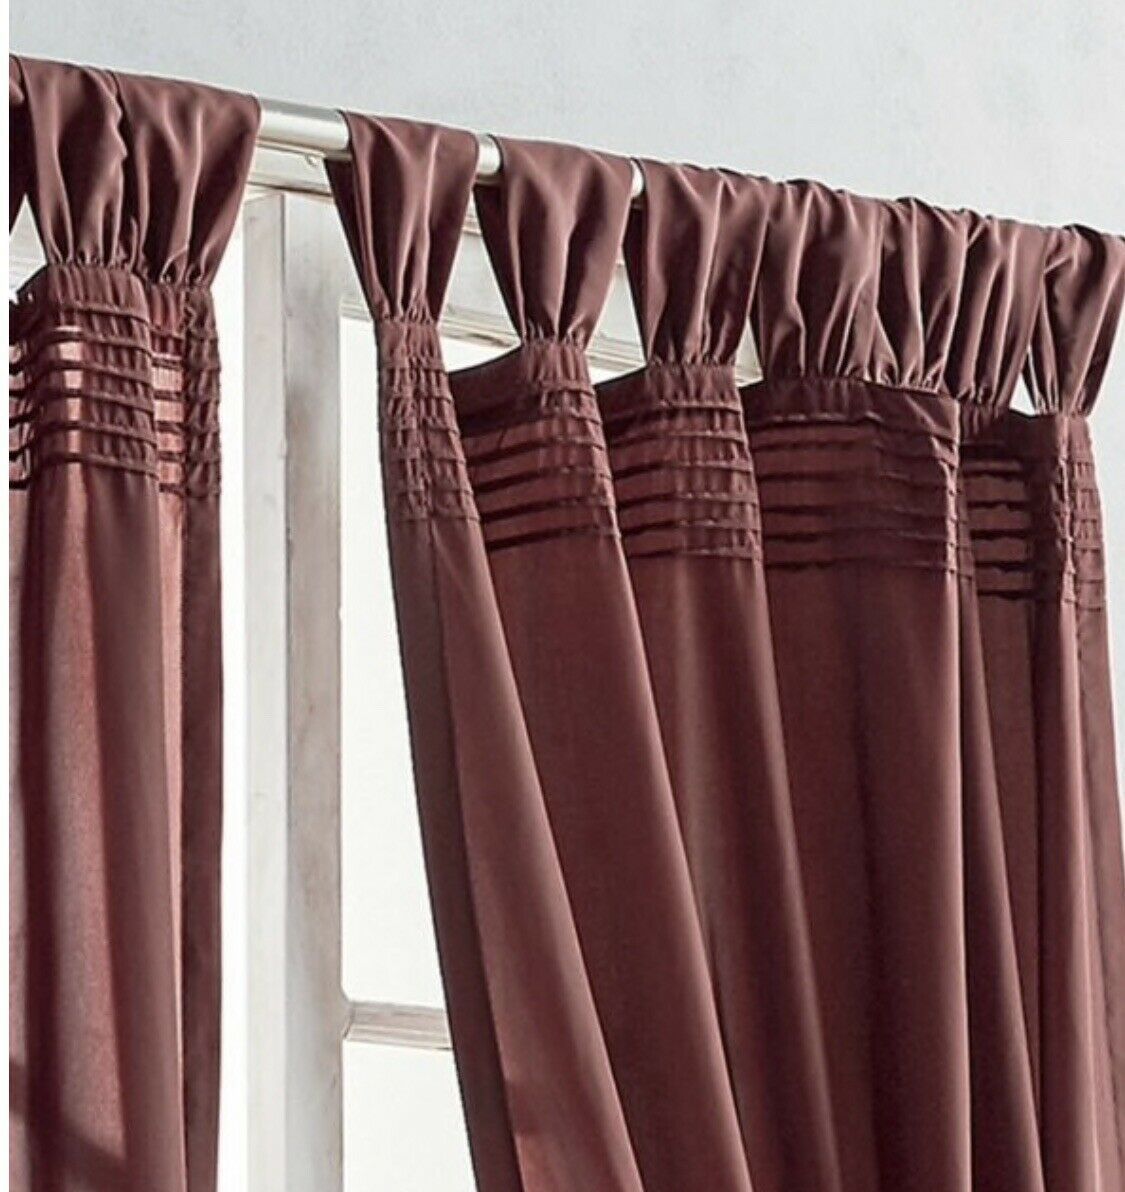 3 New Dkny City Edition Cream Window Curtain Tab Top Pleated Panels 50 X 95” Within Vue Elements Priya Tab Top Window Curtains (View 17 of 30)